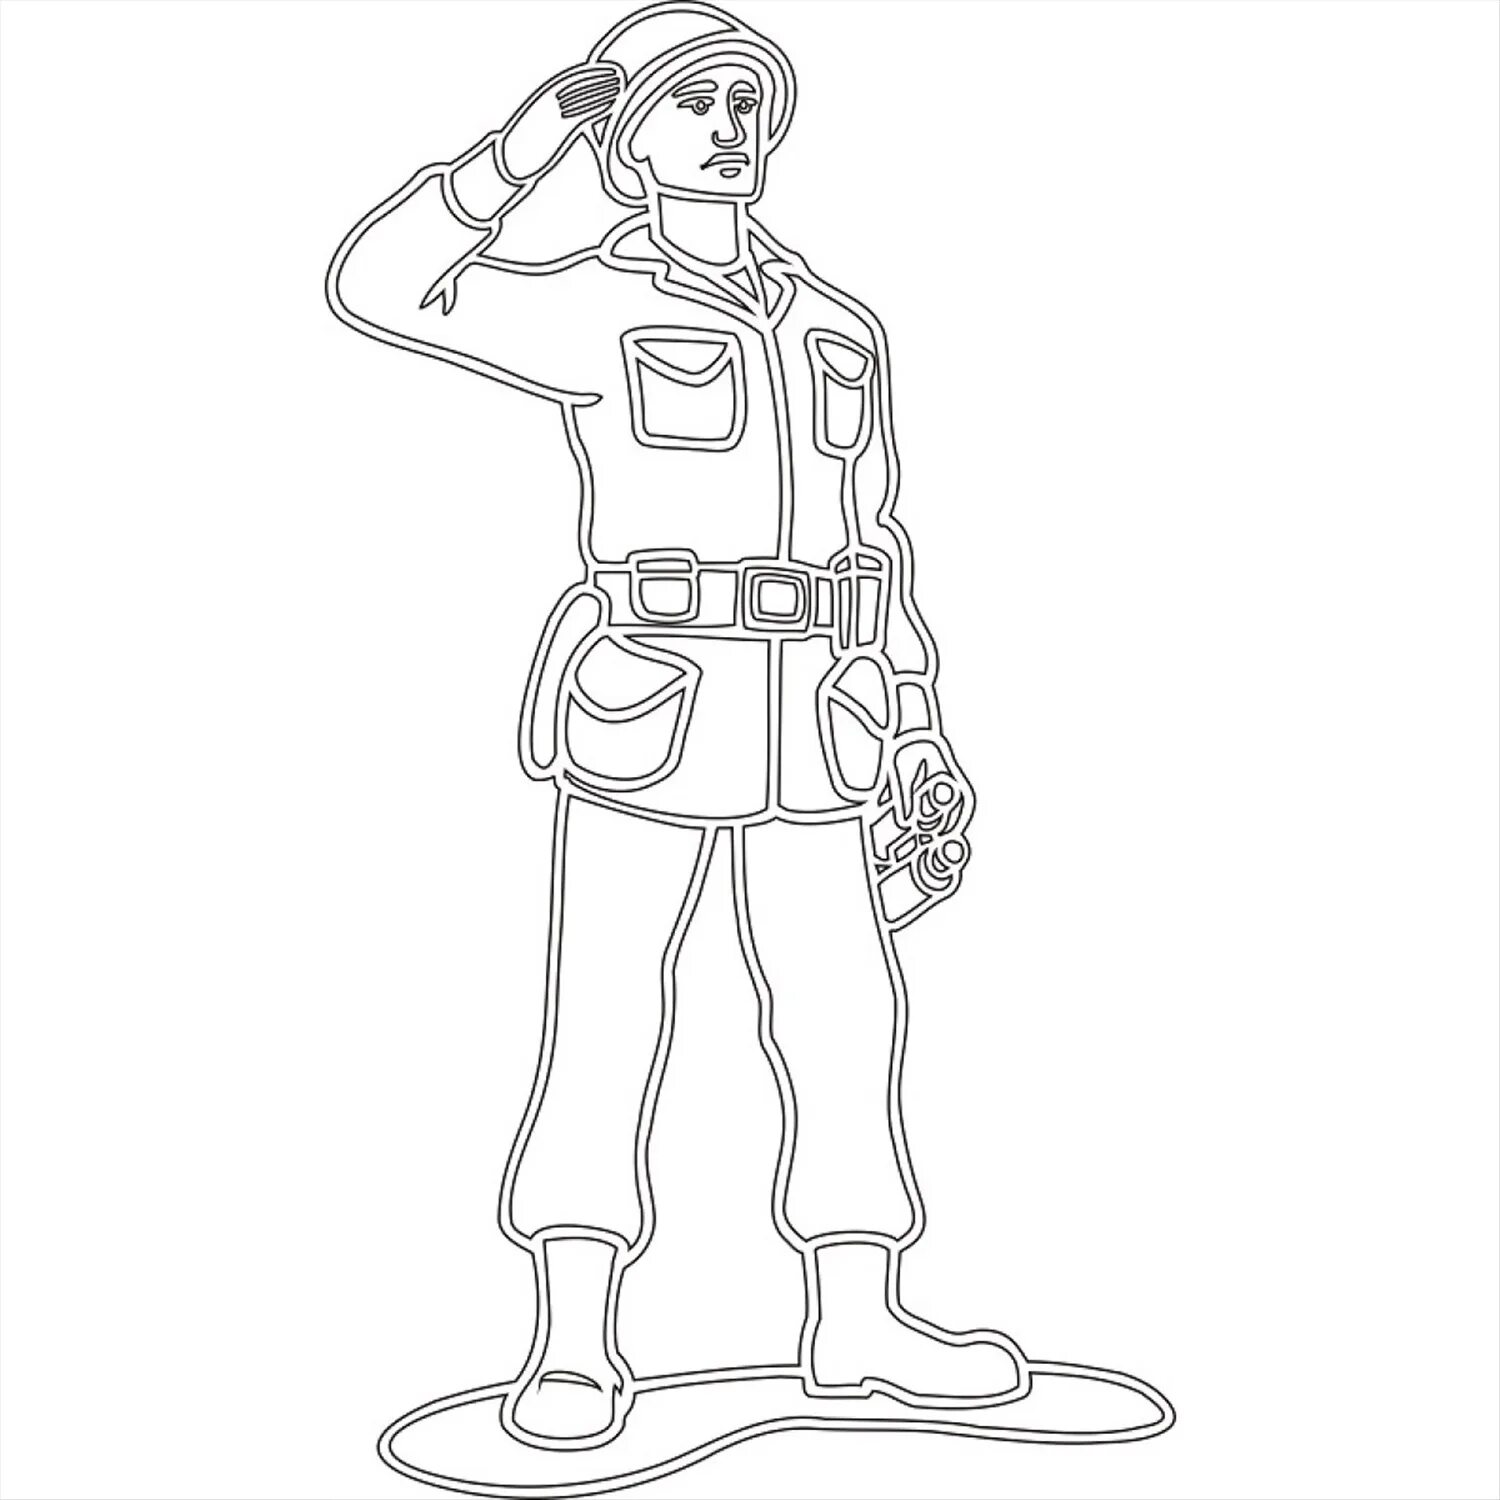 Soldier drawing for kids #8